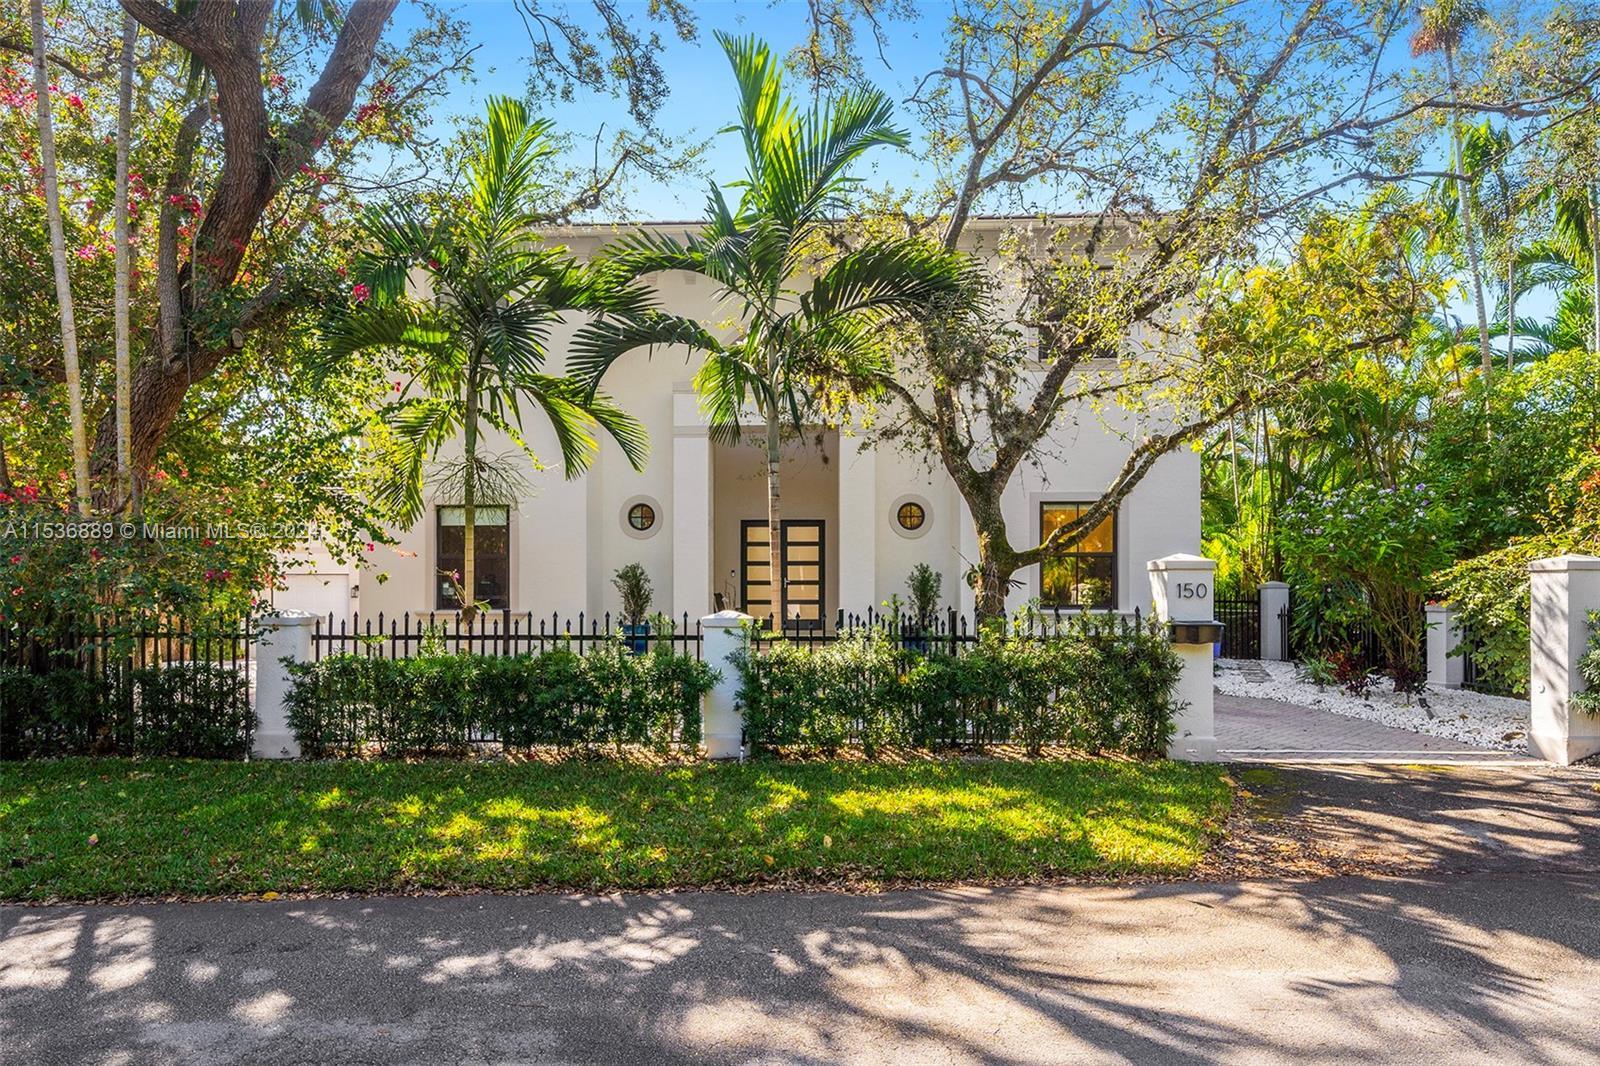 Photo of 150 W Sunrise Ave in Coral Gables, FL